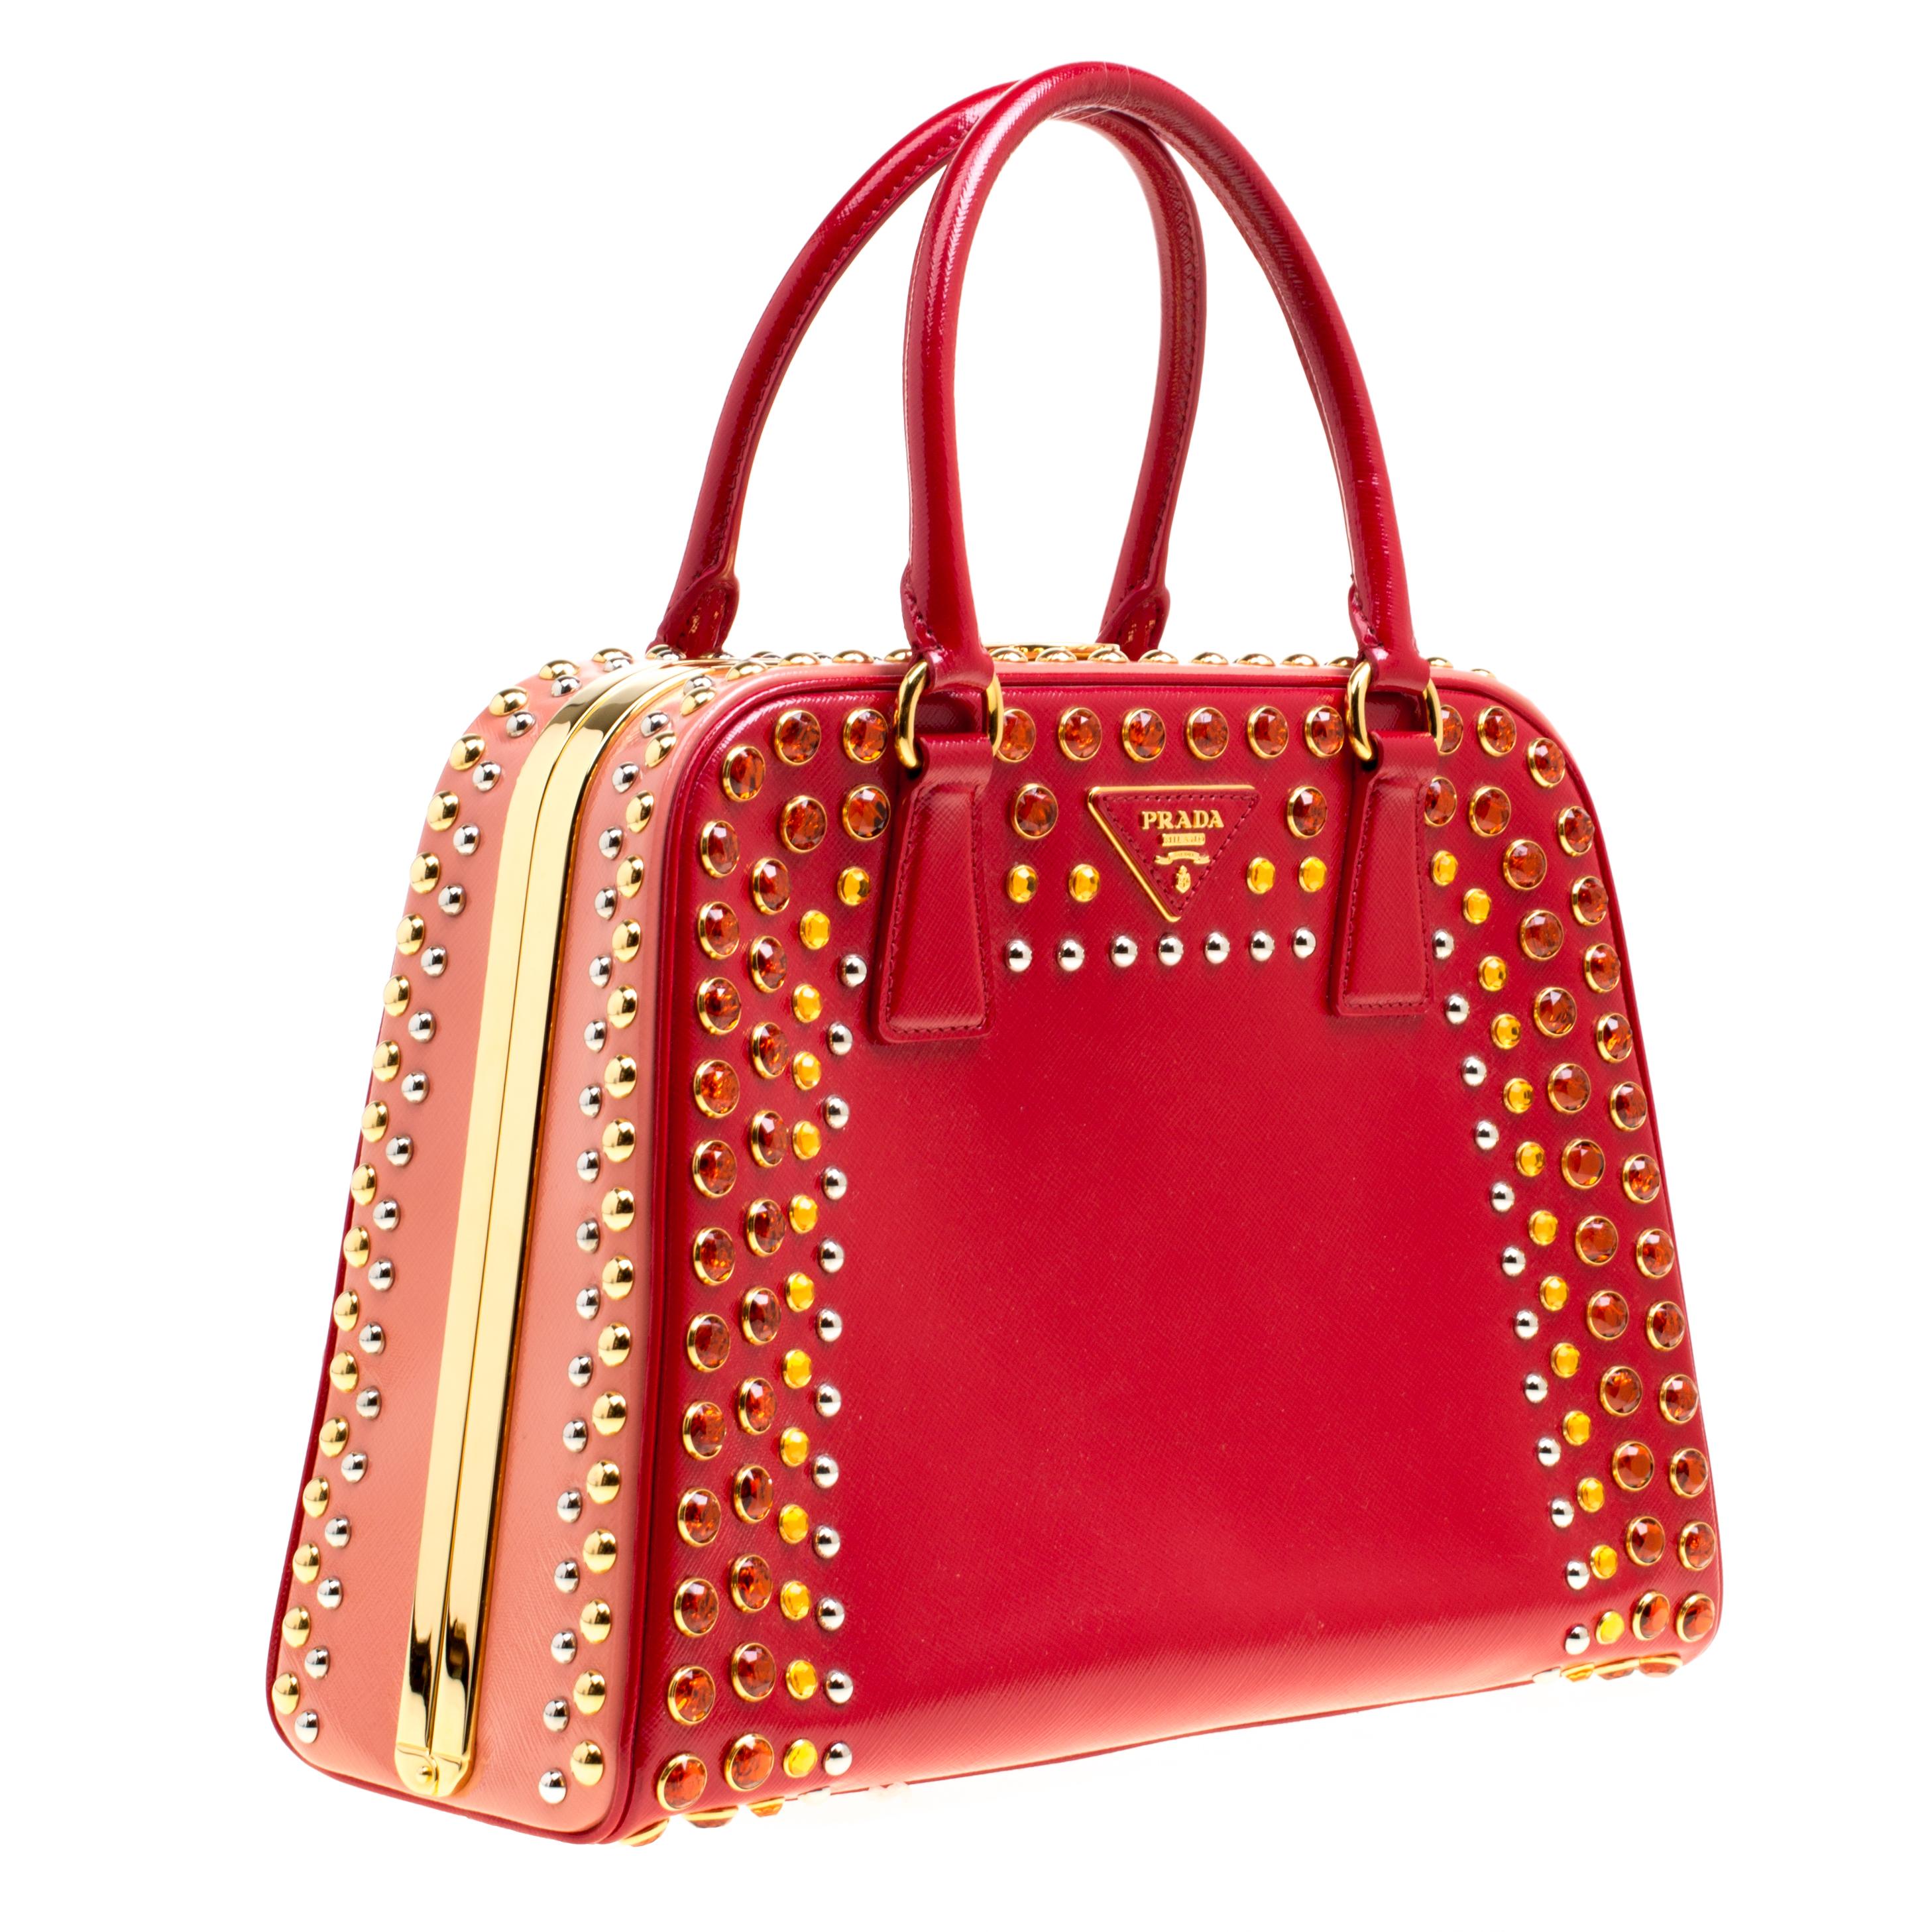 Women's Prada Red Patent Leather Pyramid Frame Top Handle Bag